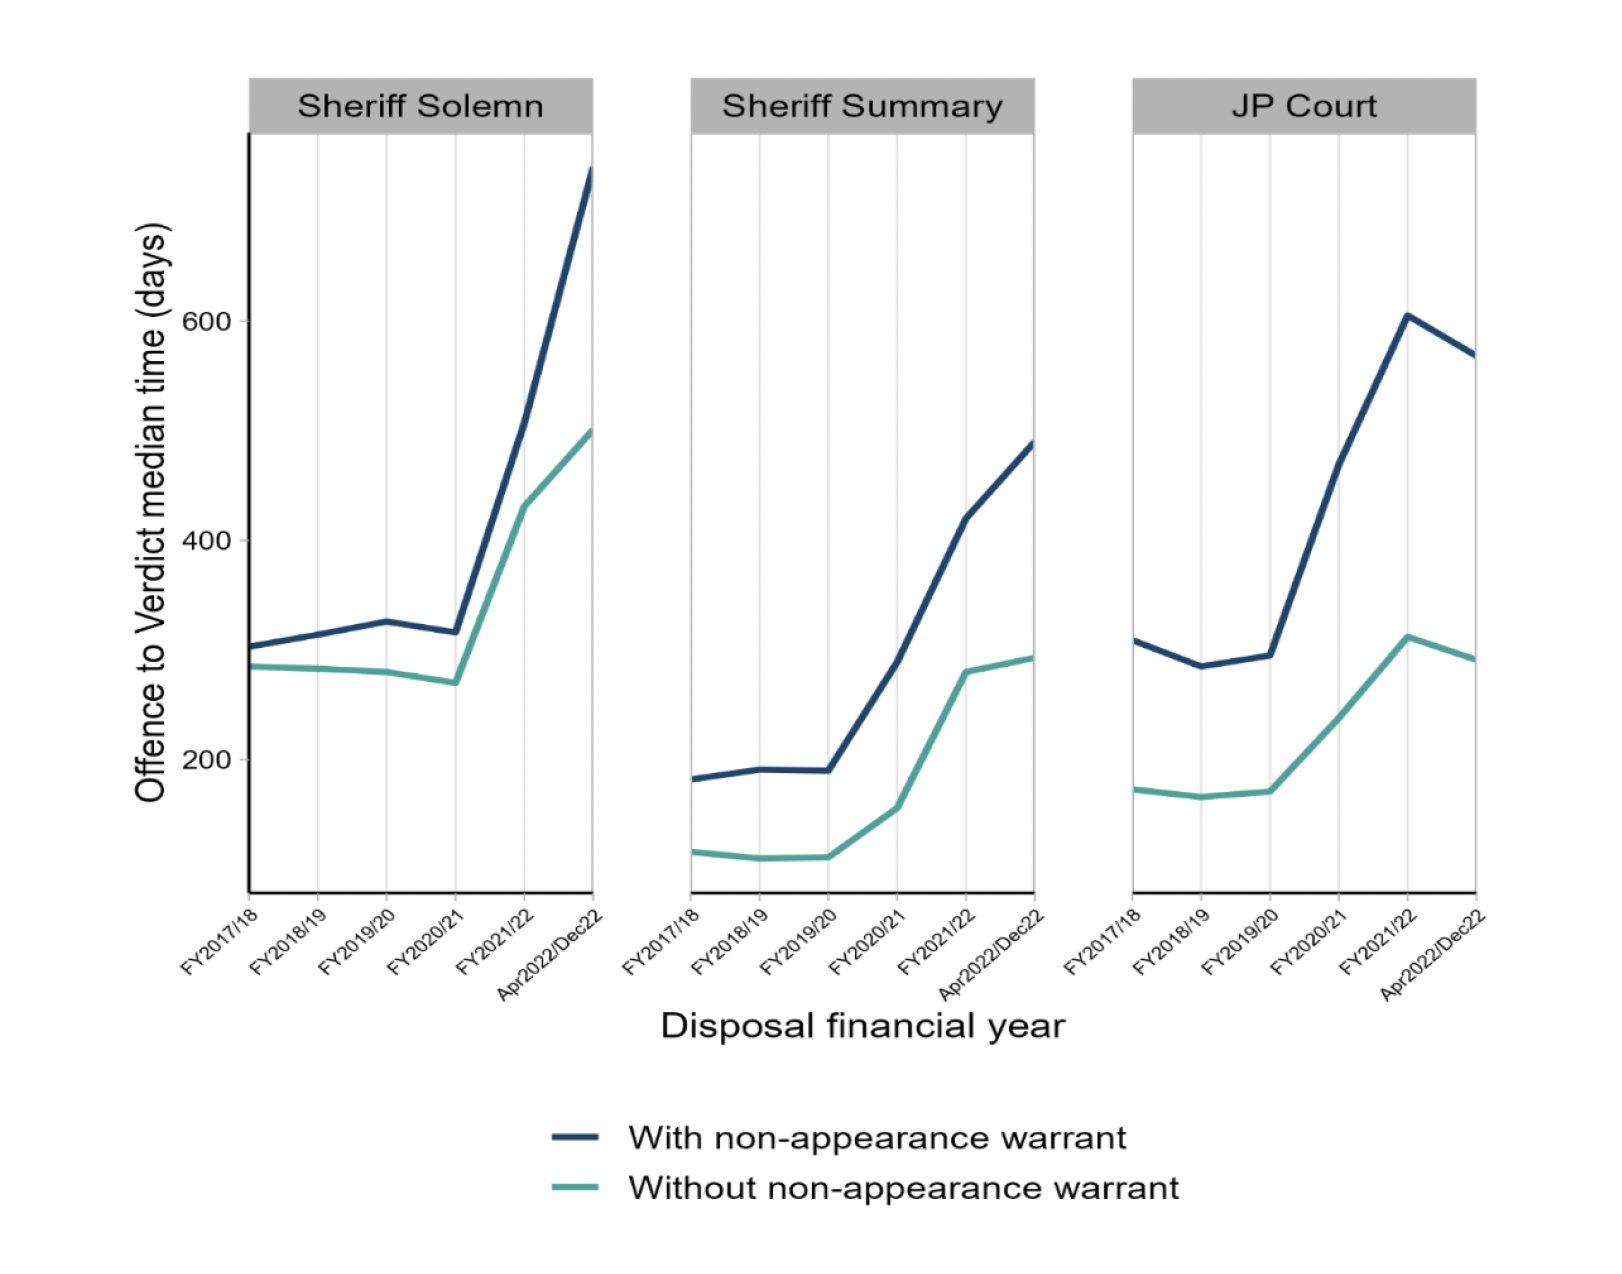 Figure 5: Three line charts showing median time from offence to verdict for all accused by type of court and warrant status showing that times are longer for accused with non-appearance warrants.  